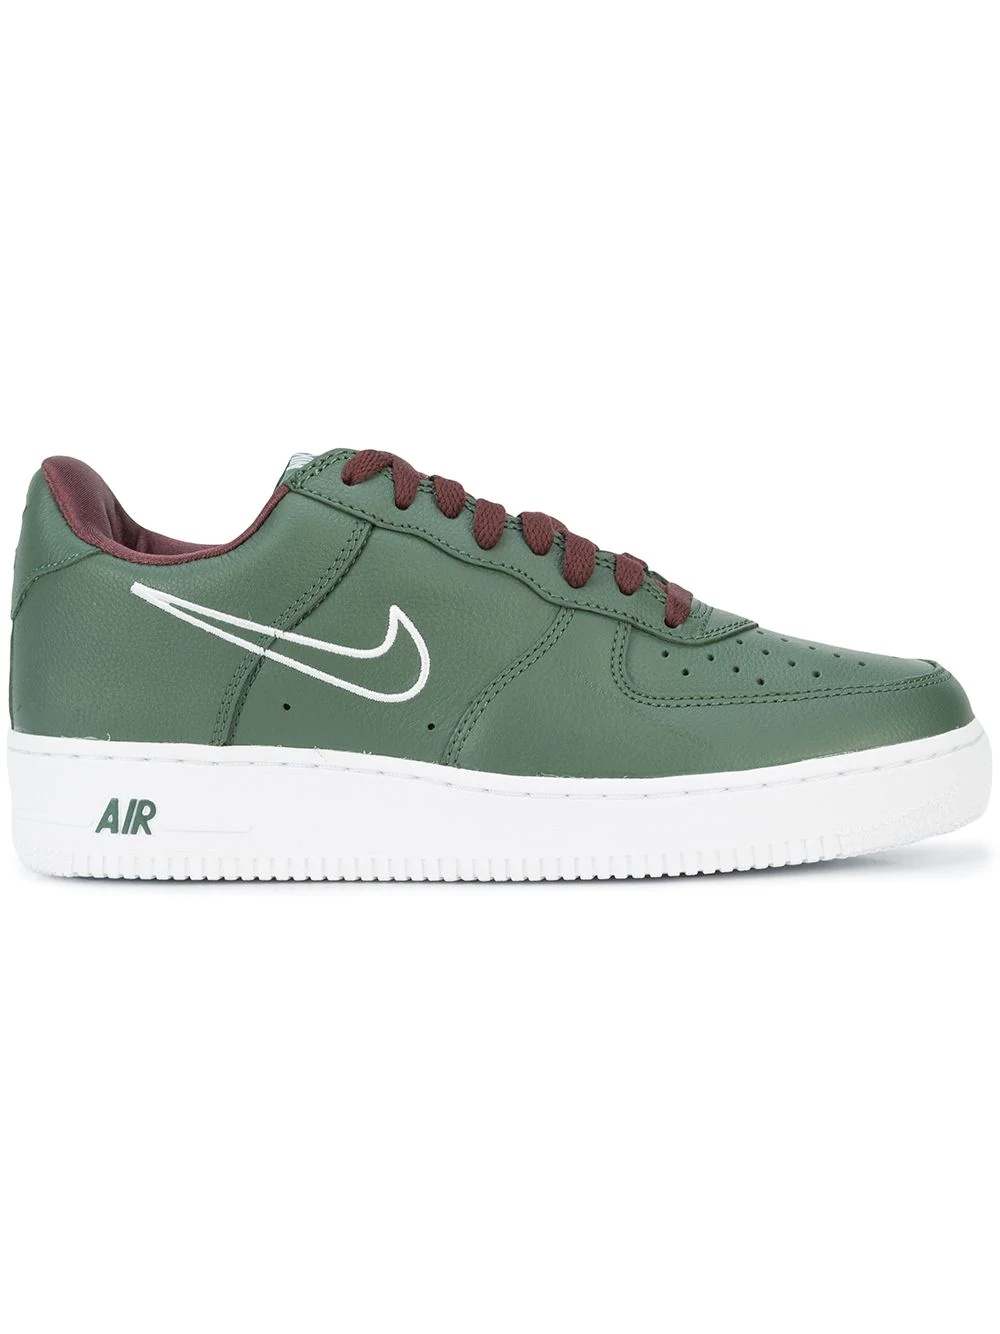 Air Force One sneakers - 1